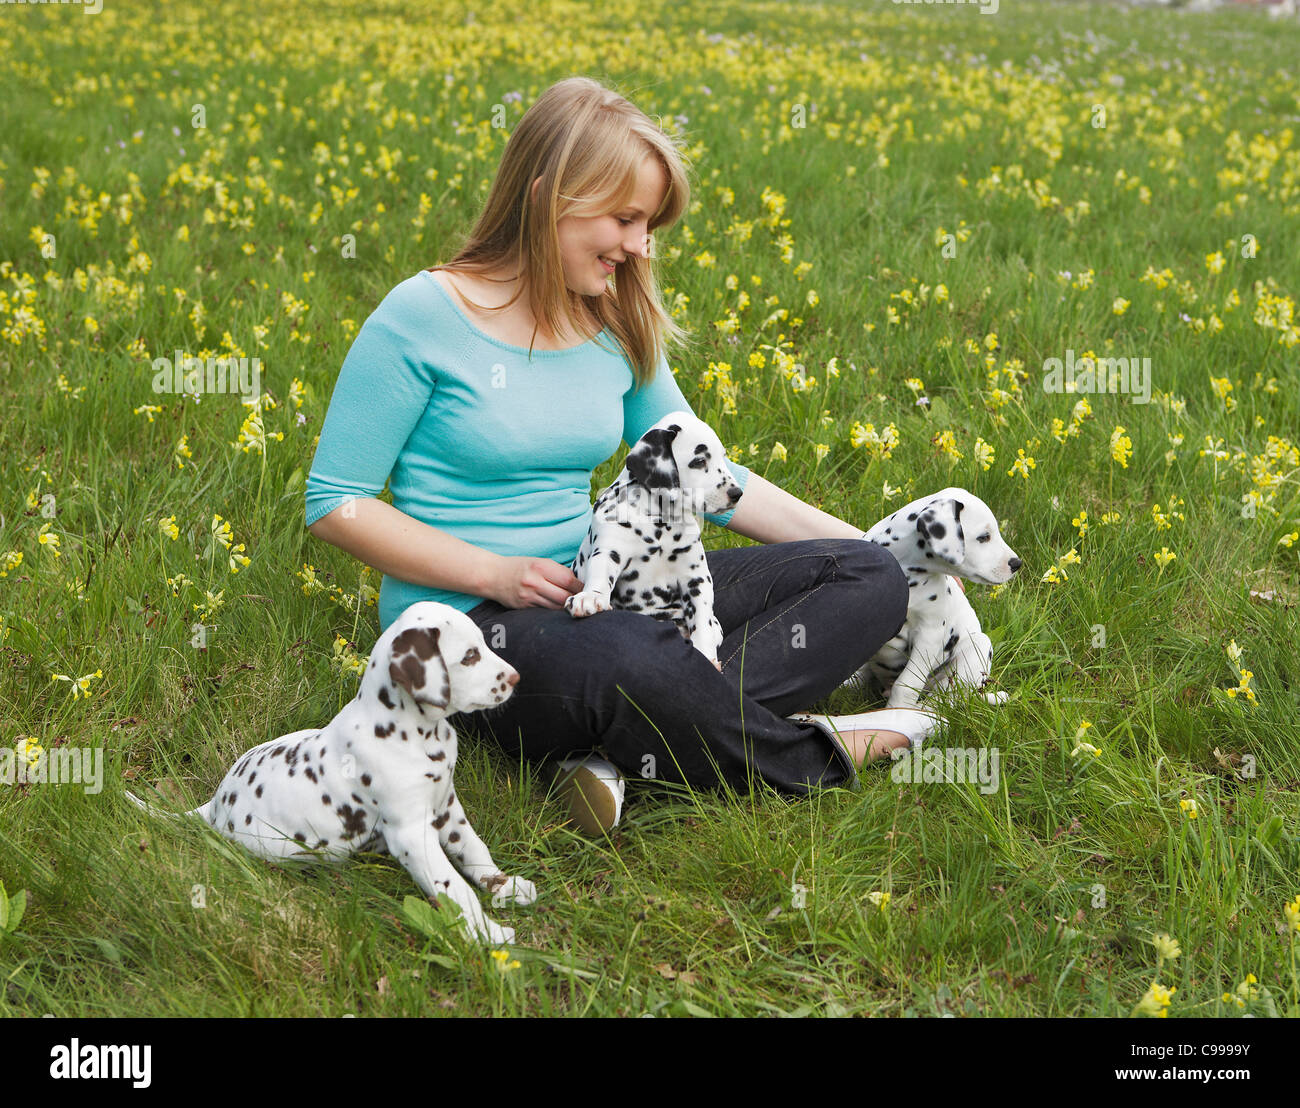 young woman Dalmatian dog puppies meadow Stock Photo